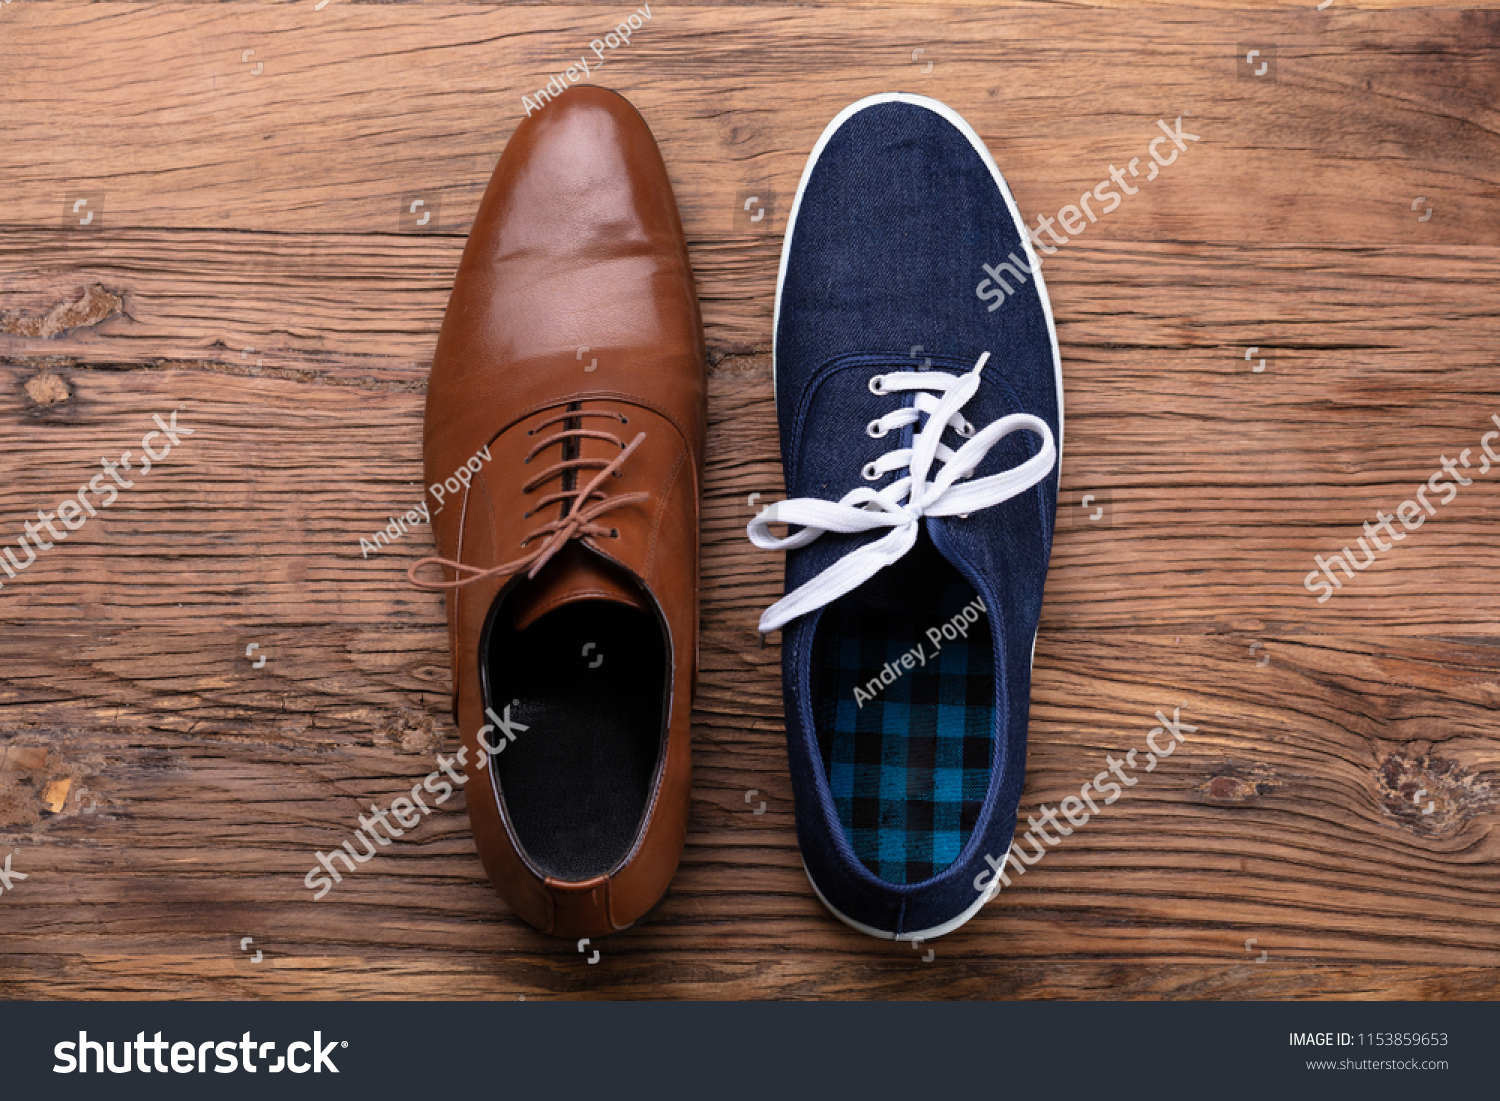 Two different colored shoes Images, Stock Photos & Vectors | Shutterstock